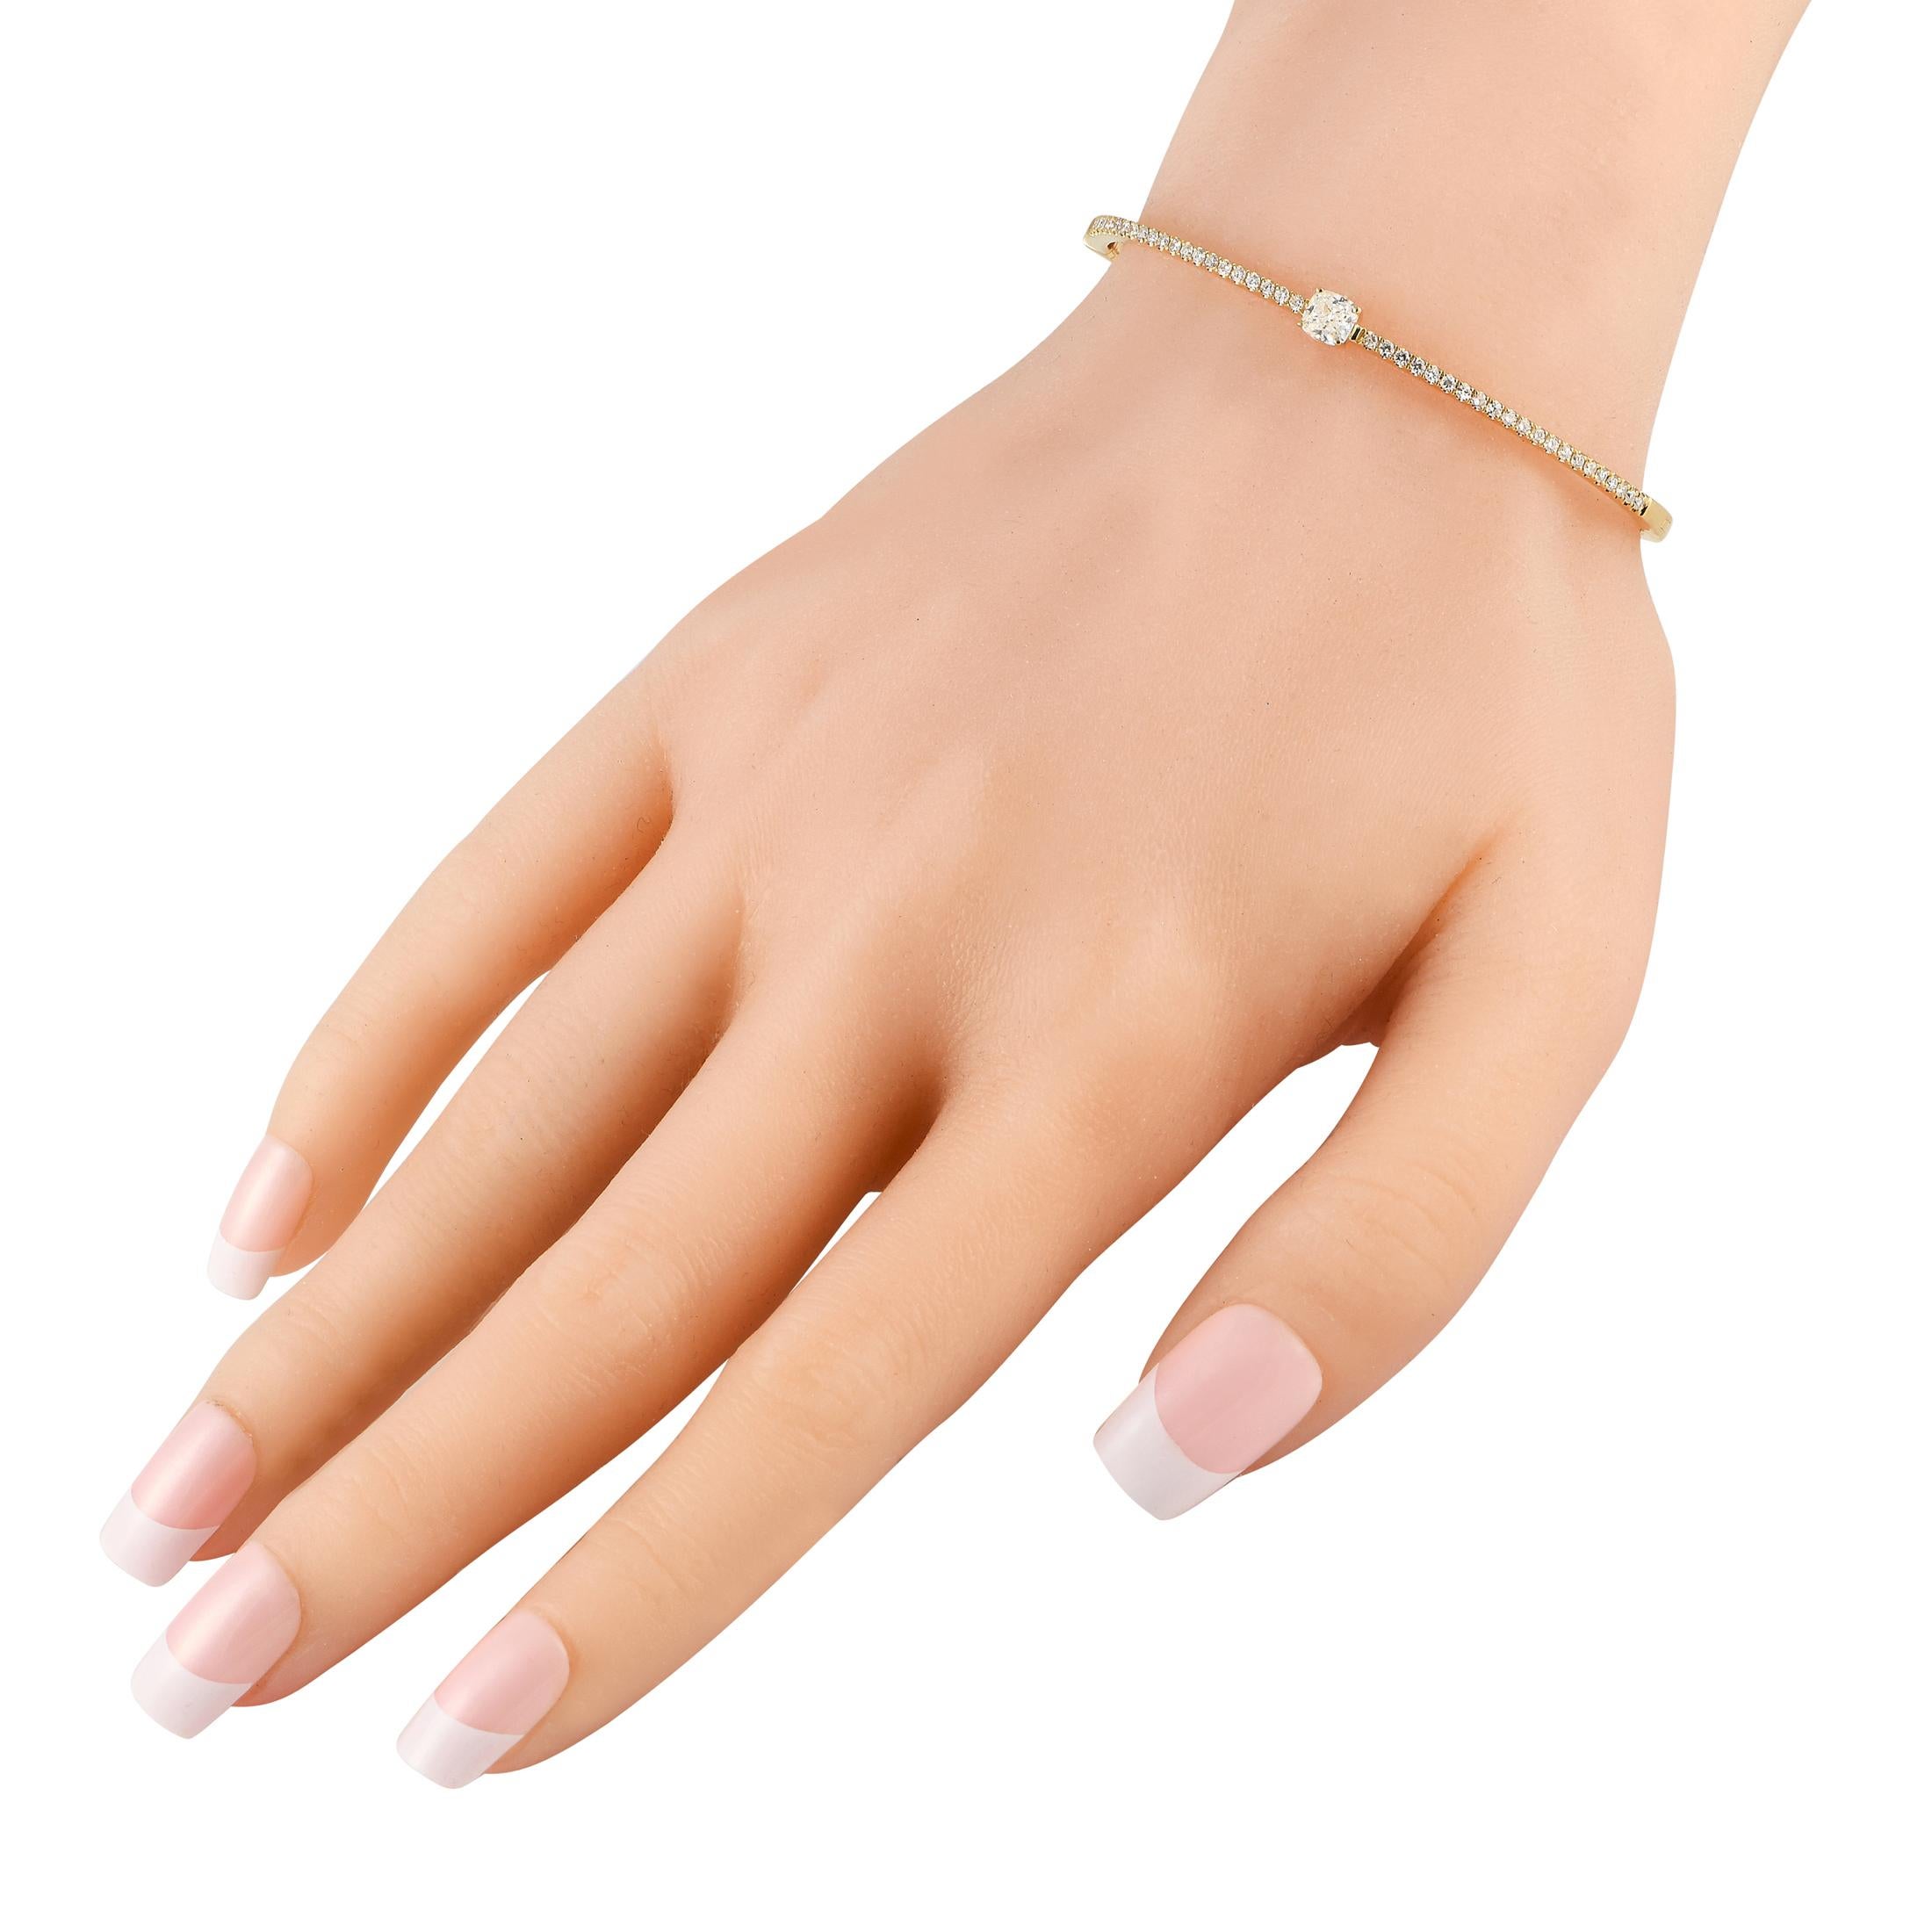 Add a touch of elegance to your wardrobe with this easy-to-wear and easy-to-pair diamond bracelet. Crafted with a slim 18K yellow gold bangle and a box tab clasp, this bracelet is perfect for any occasion. Half of the bangle's circumference is